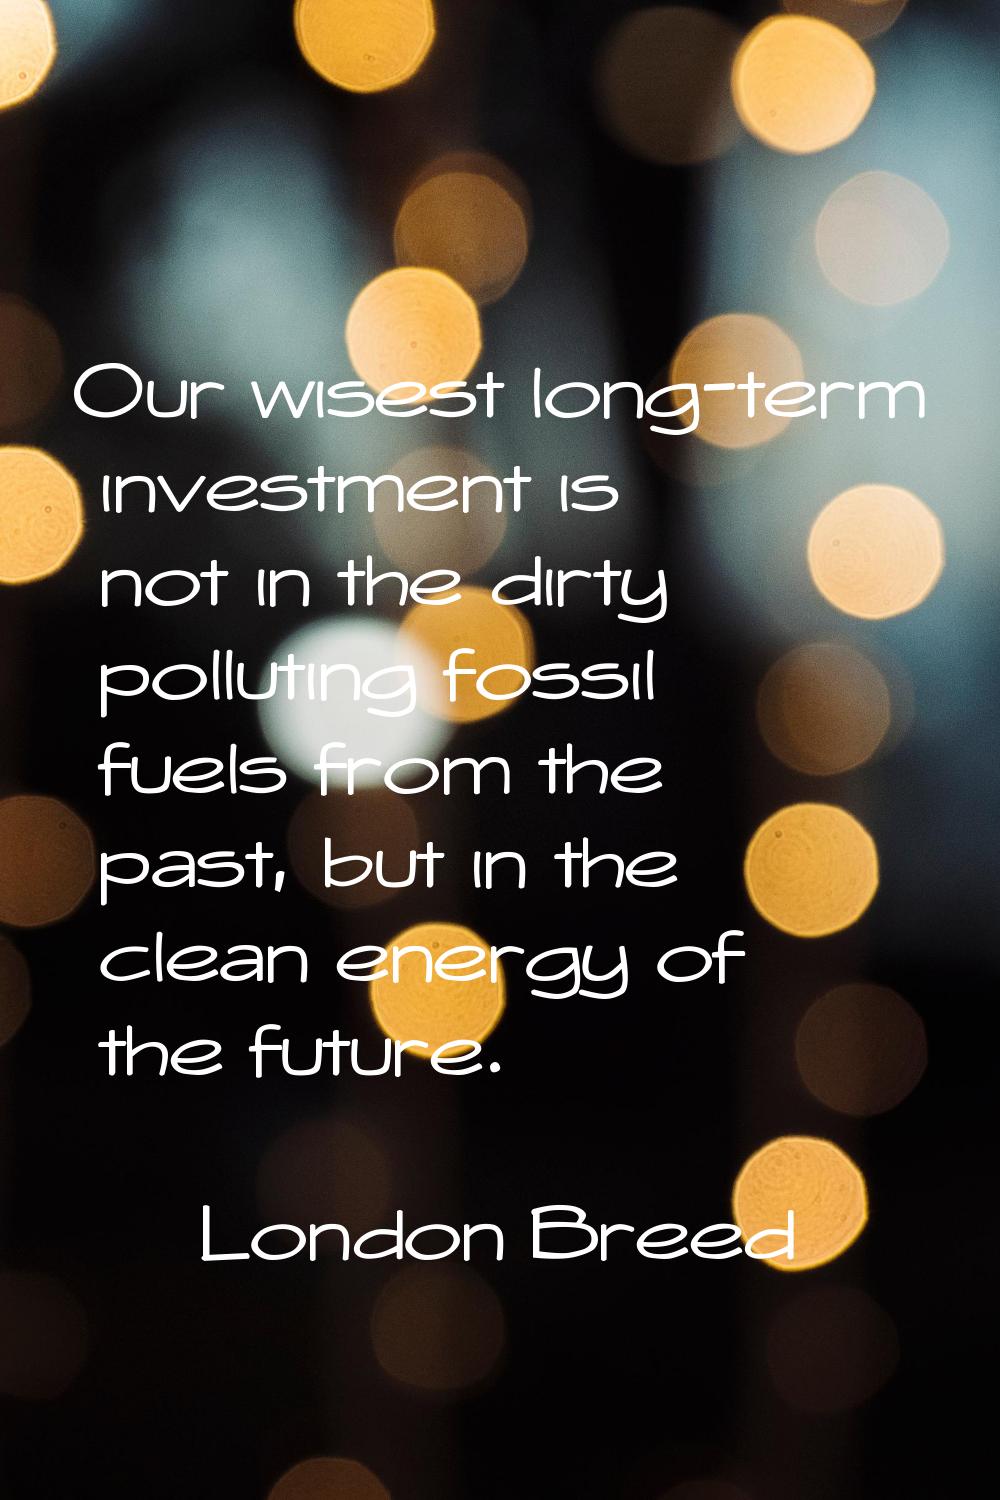 Our wisest long-term investment is not in the dirty polluting fossil fuels from the past, but in th